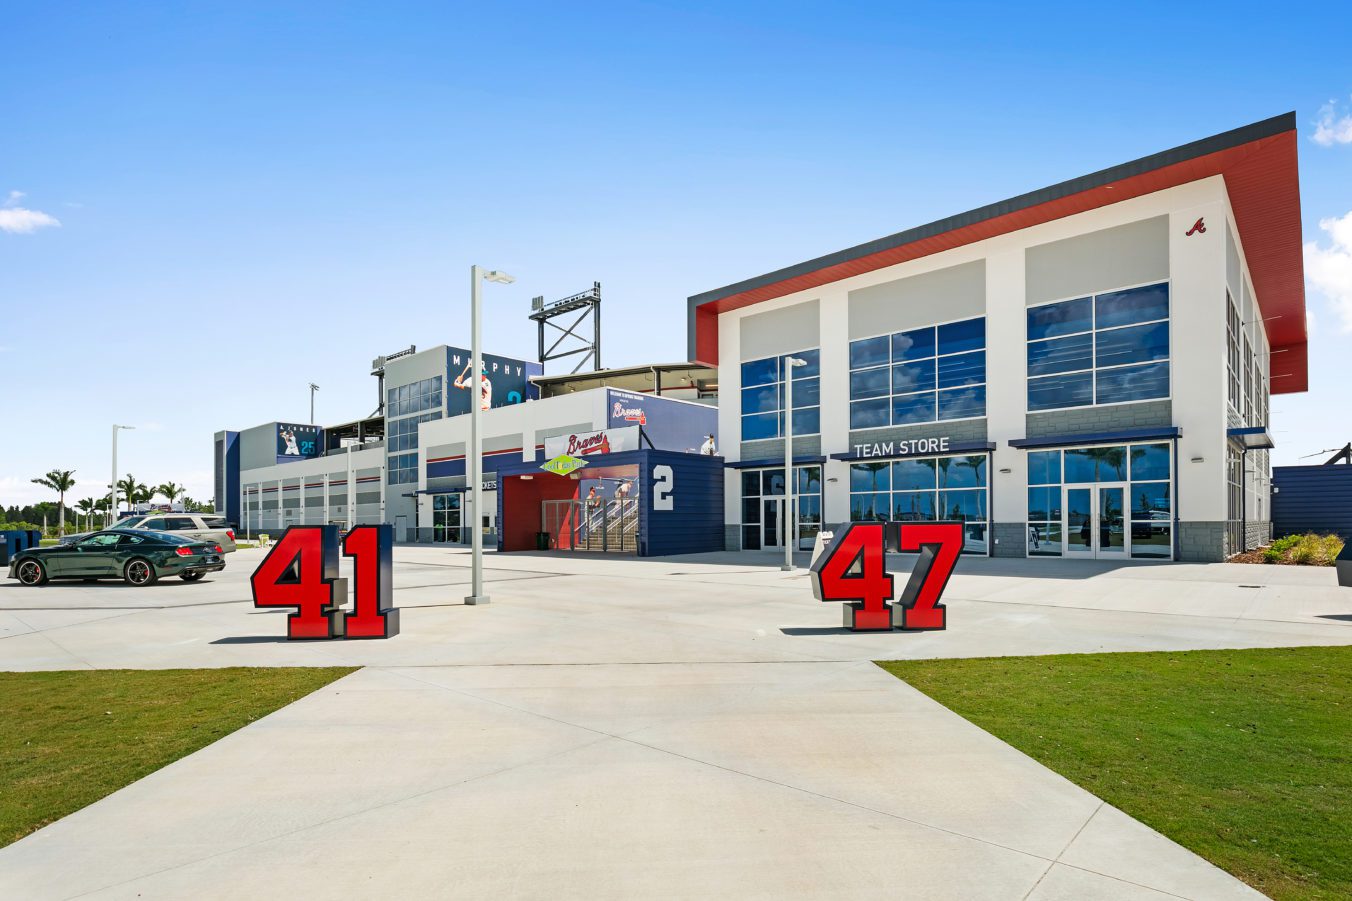 Main entrance for the Atlanta Braves Spring Training Facility CoolToday Park